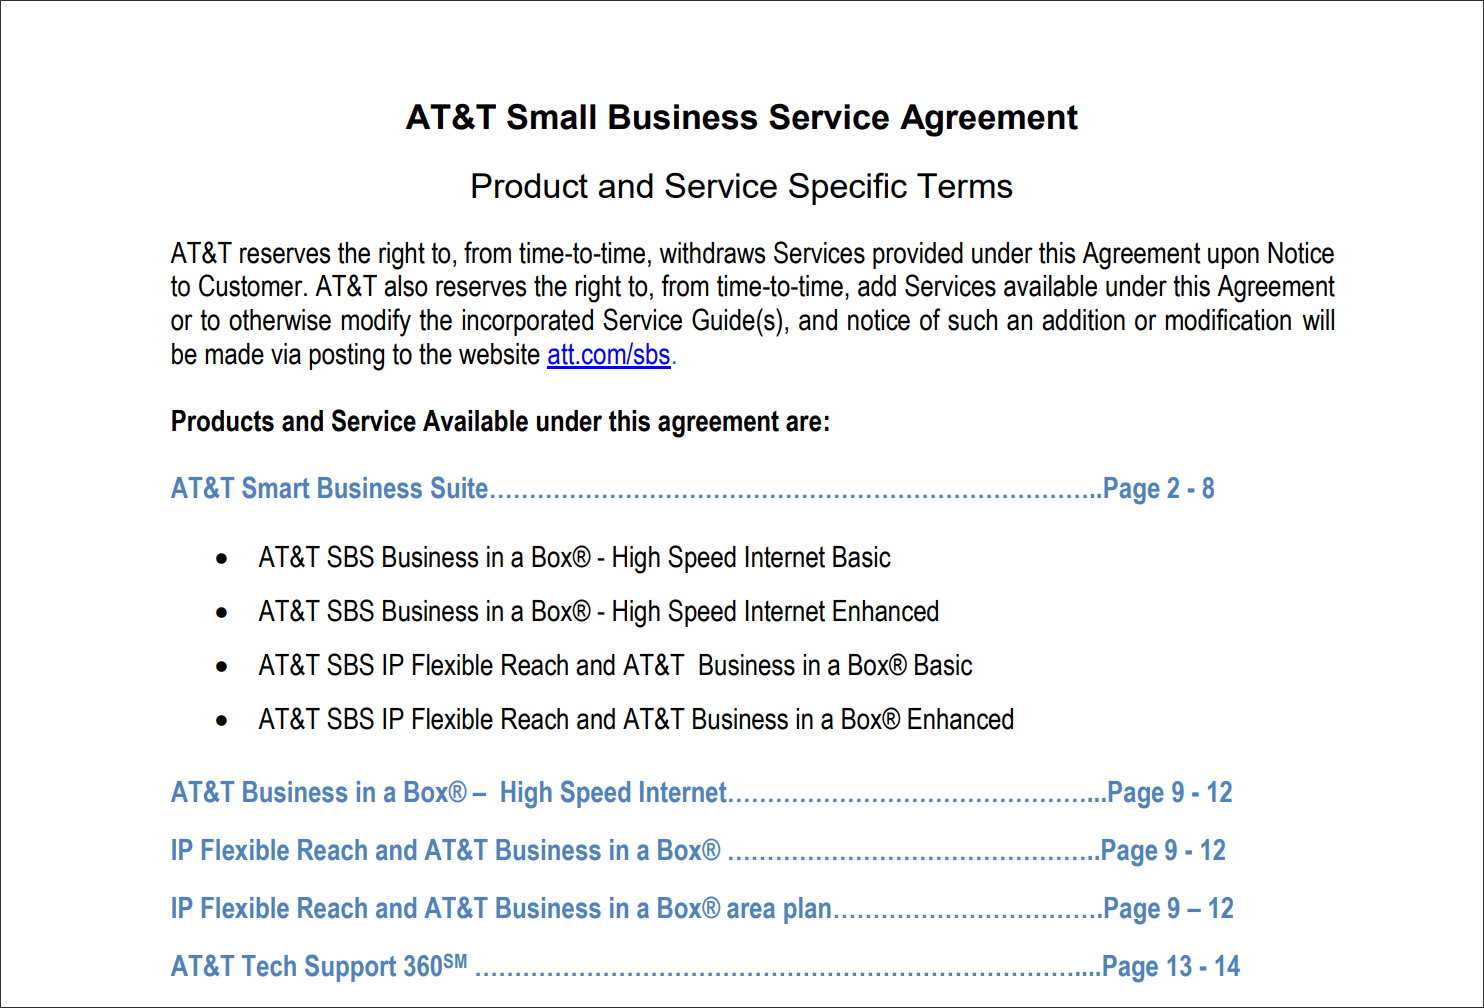 AT&T Service-Level Agreement Table of Contents